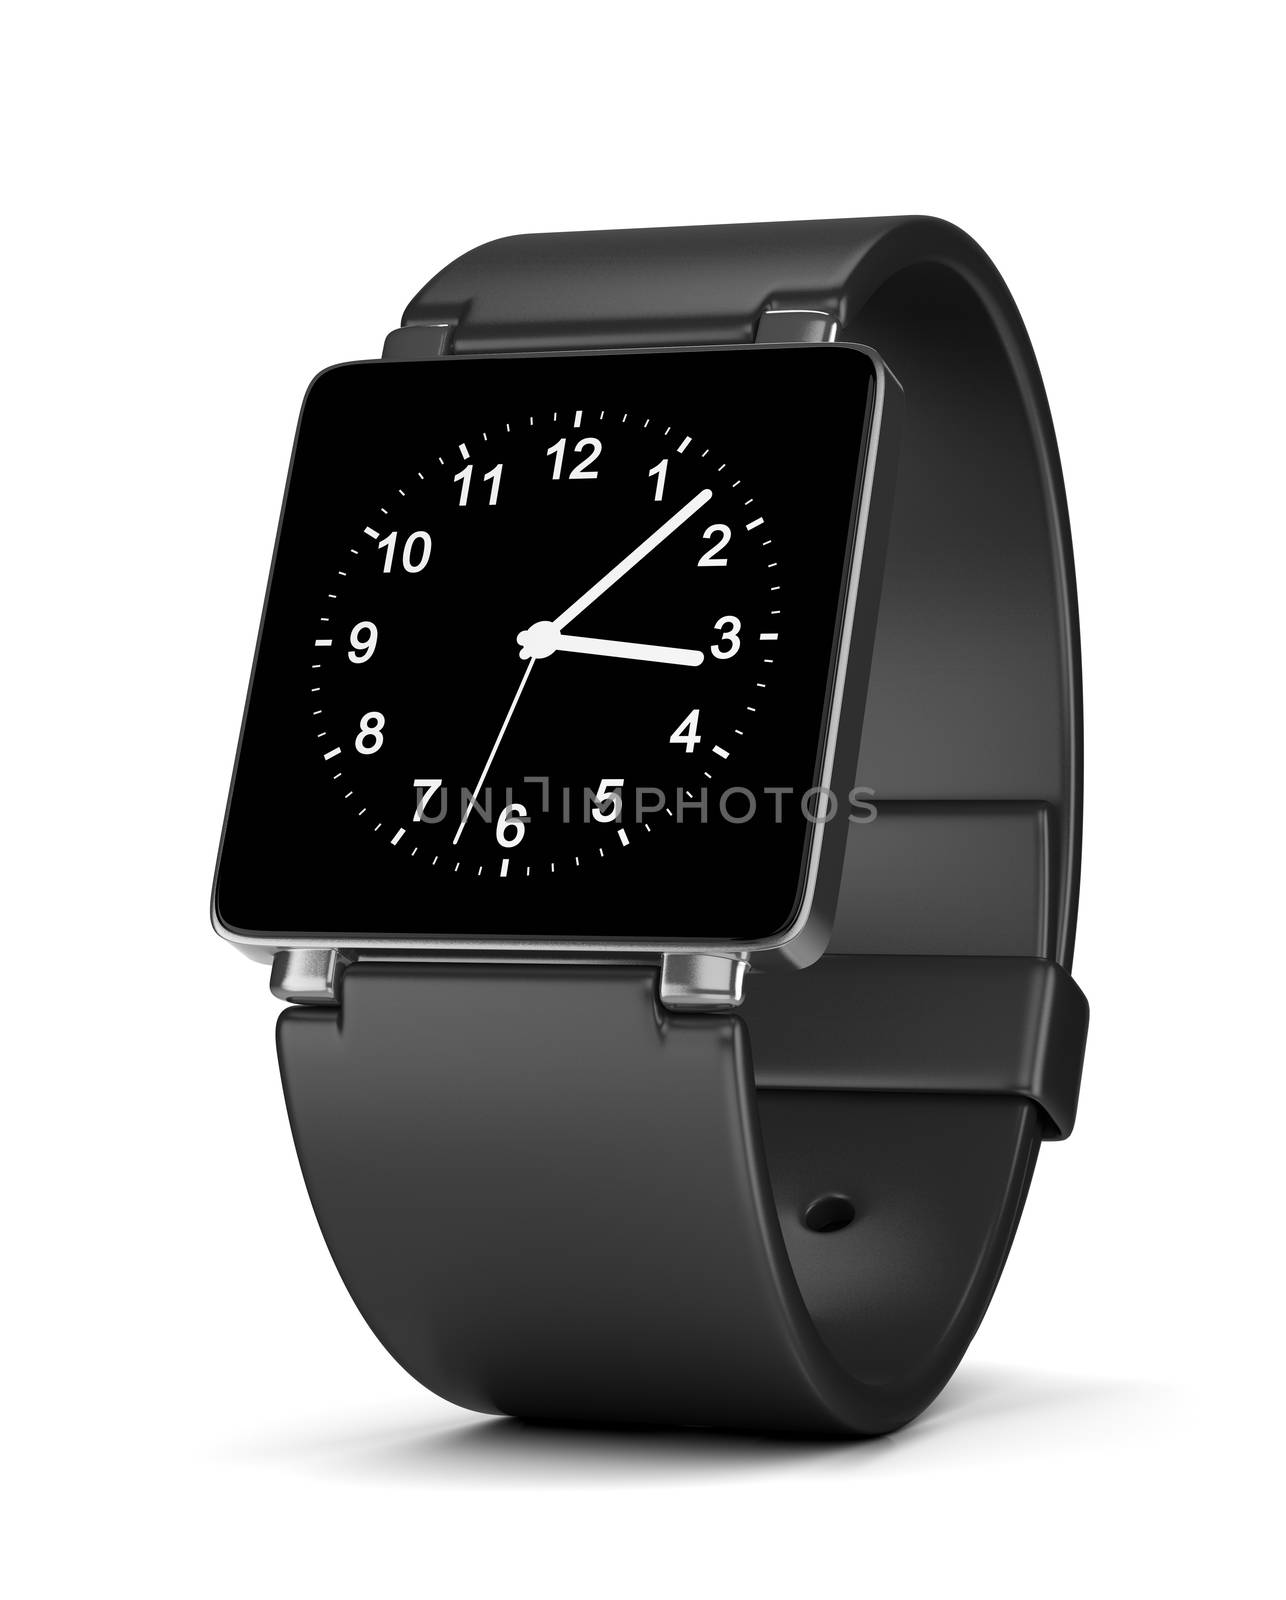 Black Smartwatch with Analog Clock on Display on White Background 3D Illustration